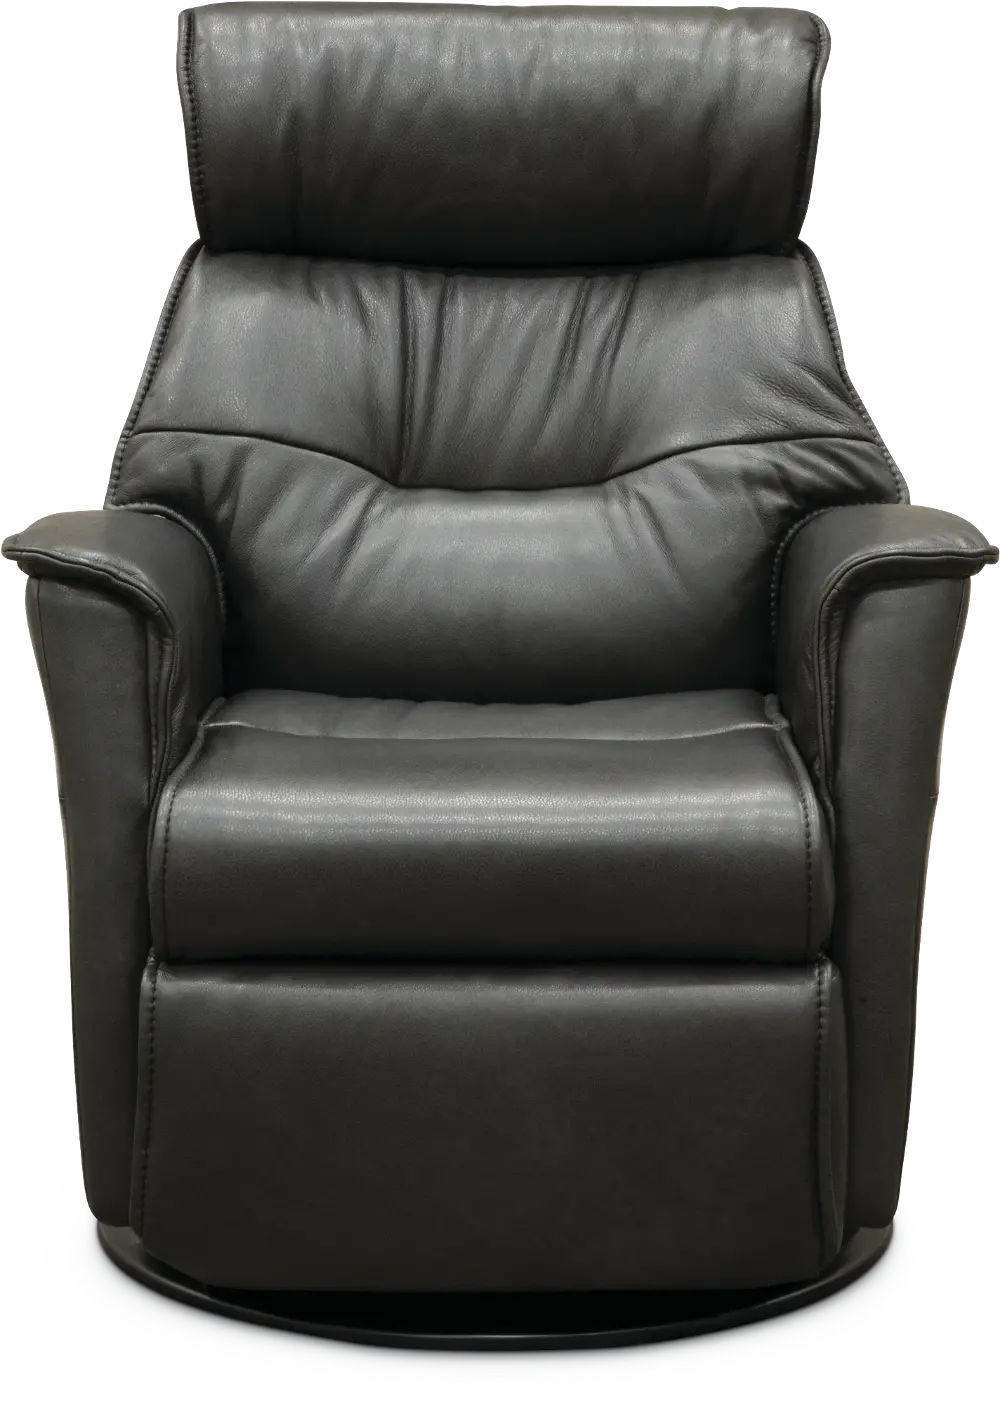 Charcoal Gray Leather Compact Swivel Glider Power Recliner - Captain-1